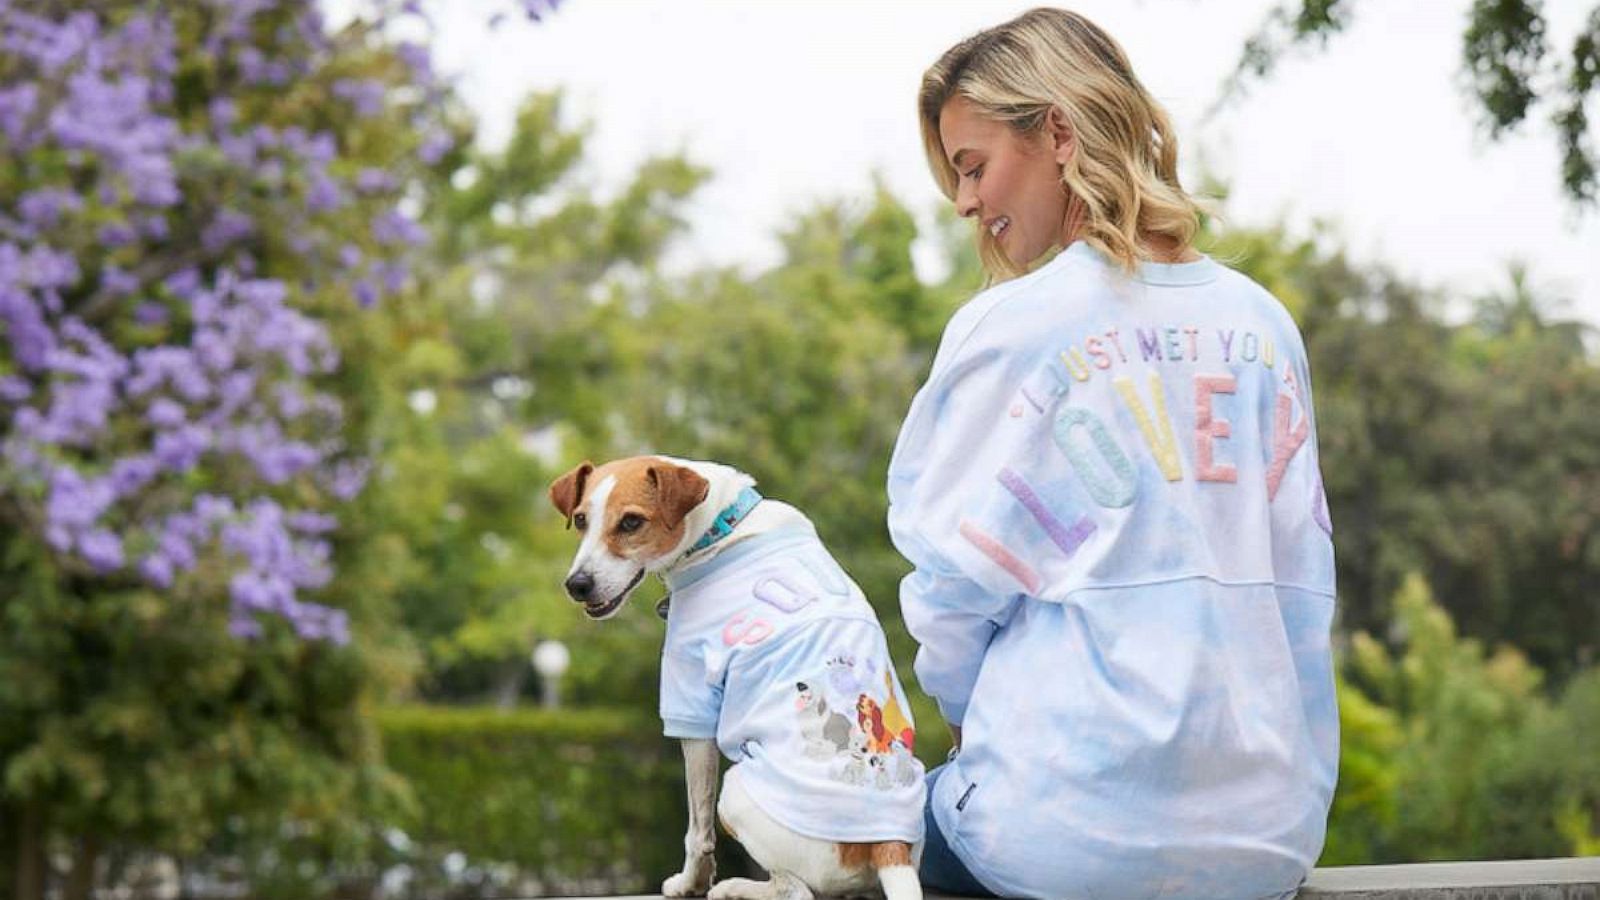 spirit jersey for dogs